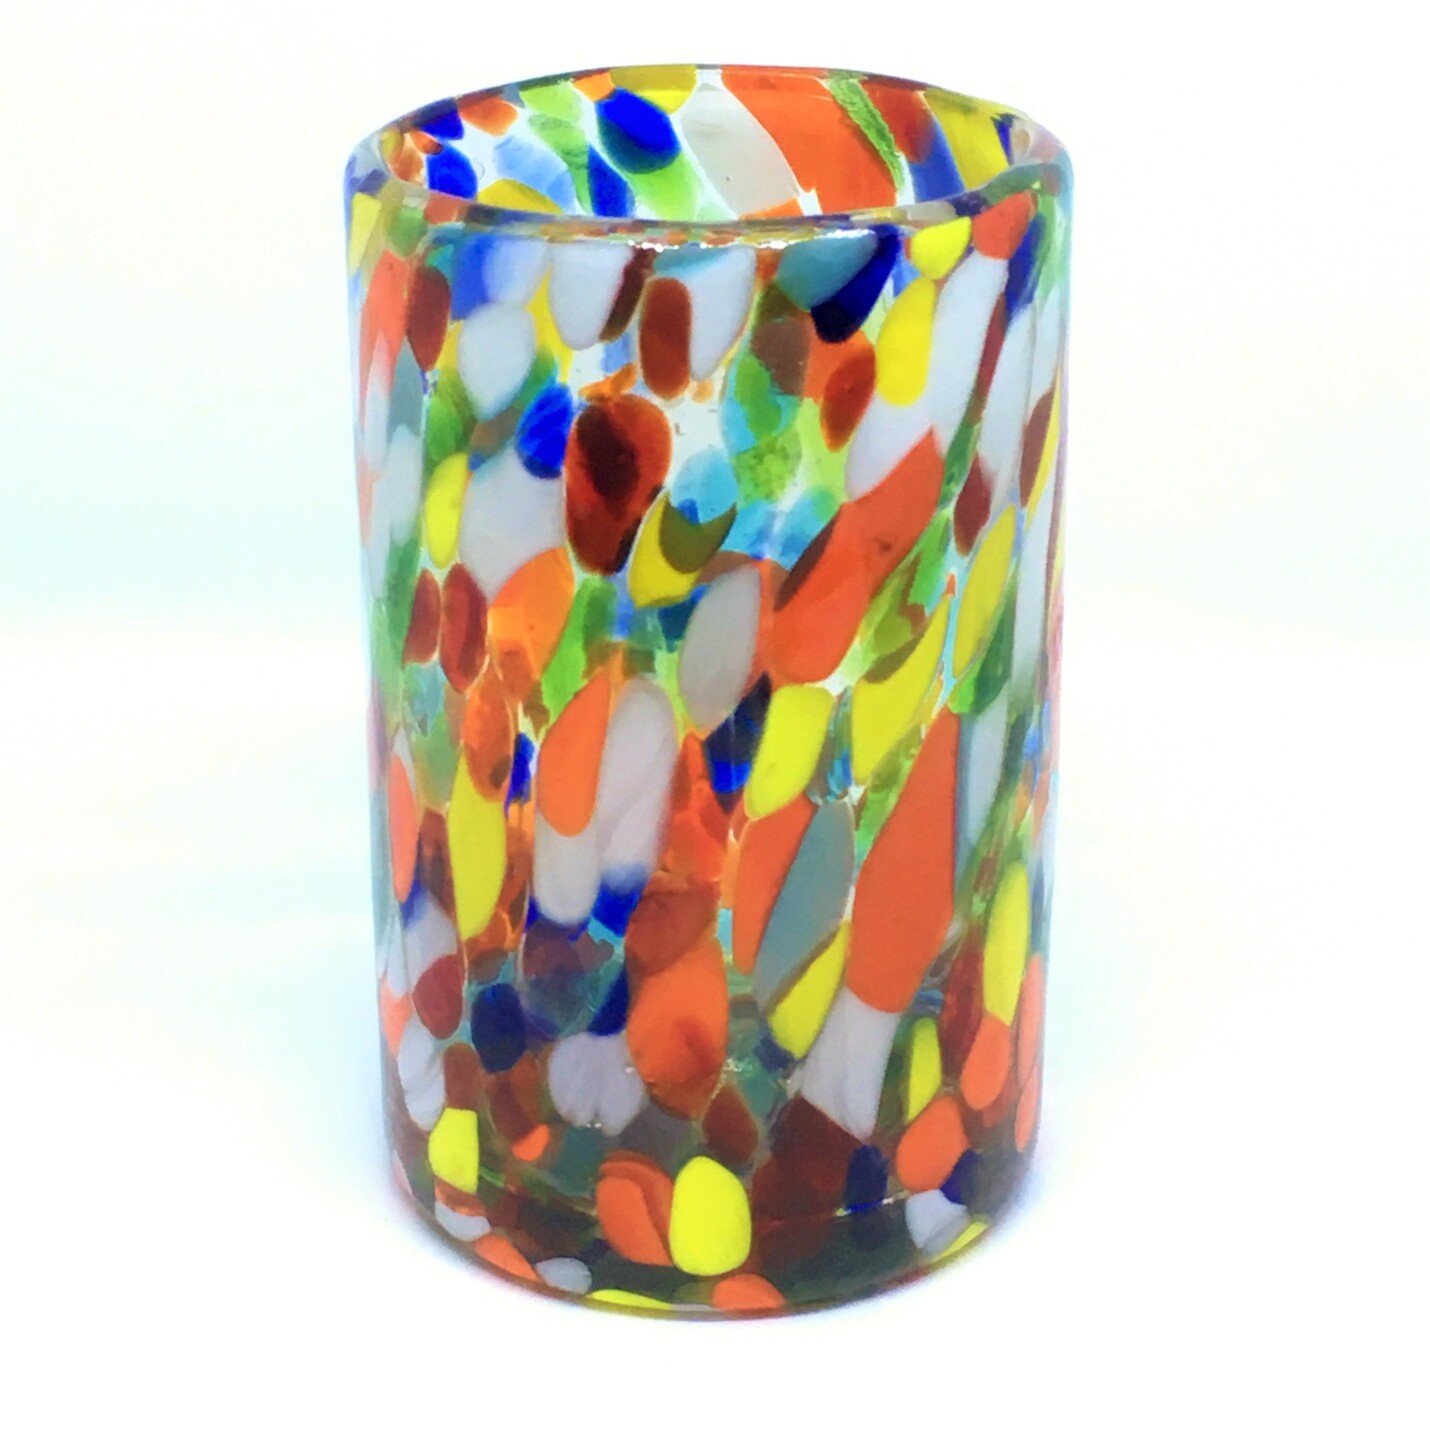 New Items / Confetti Carnival drinking glasses (set of 6) / Let the spring come into your home with this colorful set of glasses. The multicolor glass decoration makes them a standout in any place.